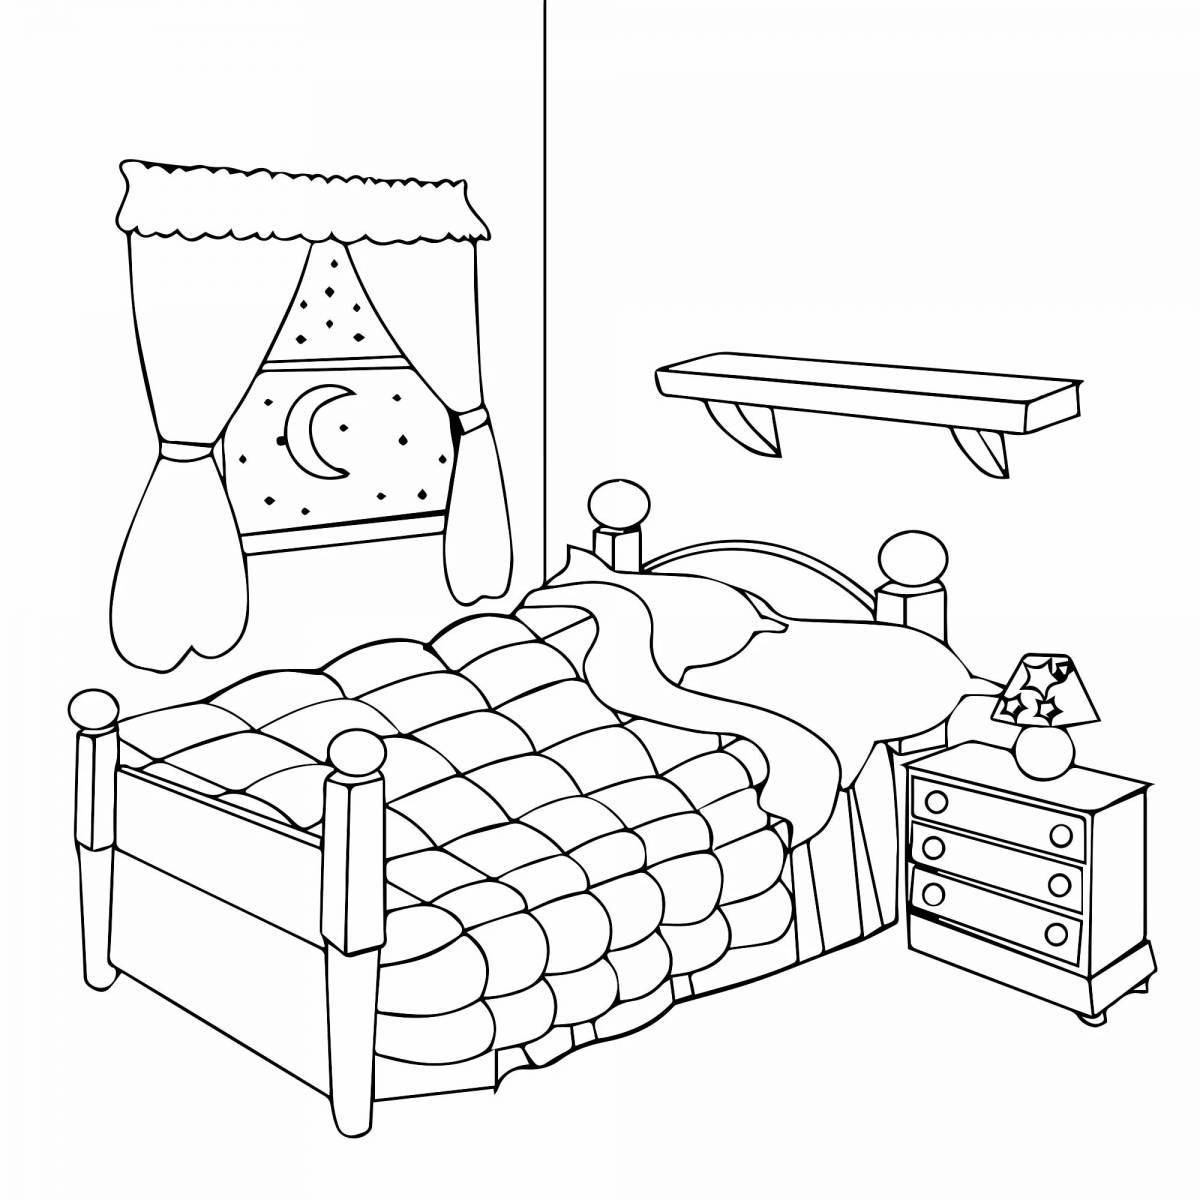 Awesome baby crib coloring page